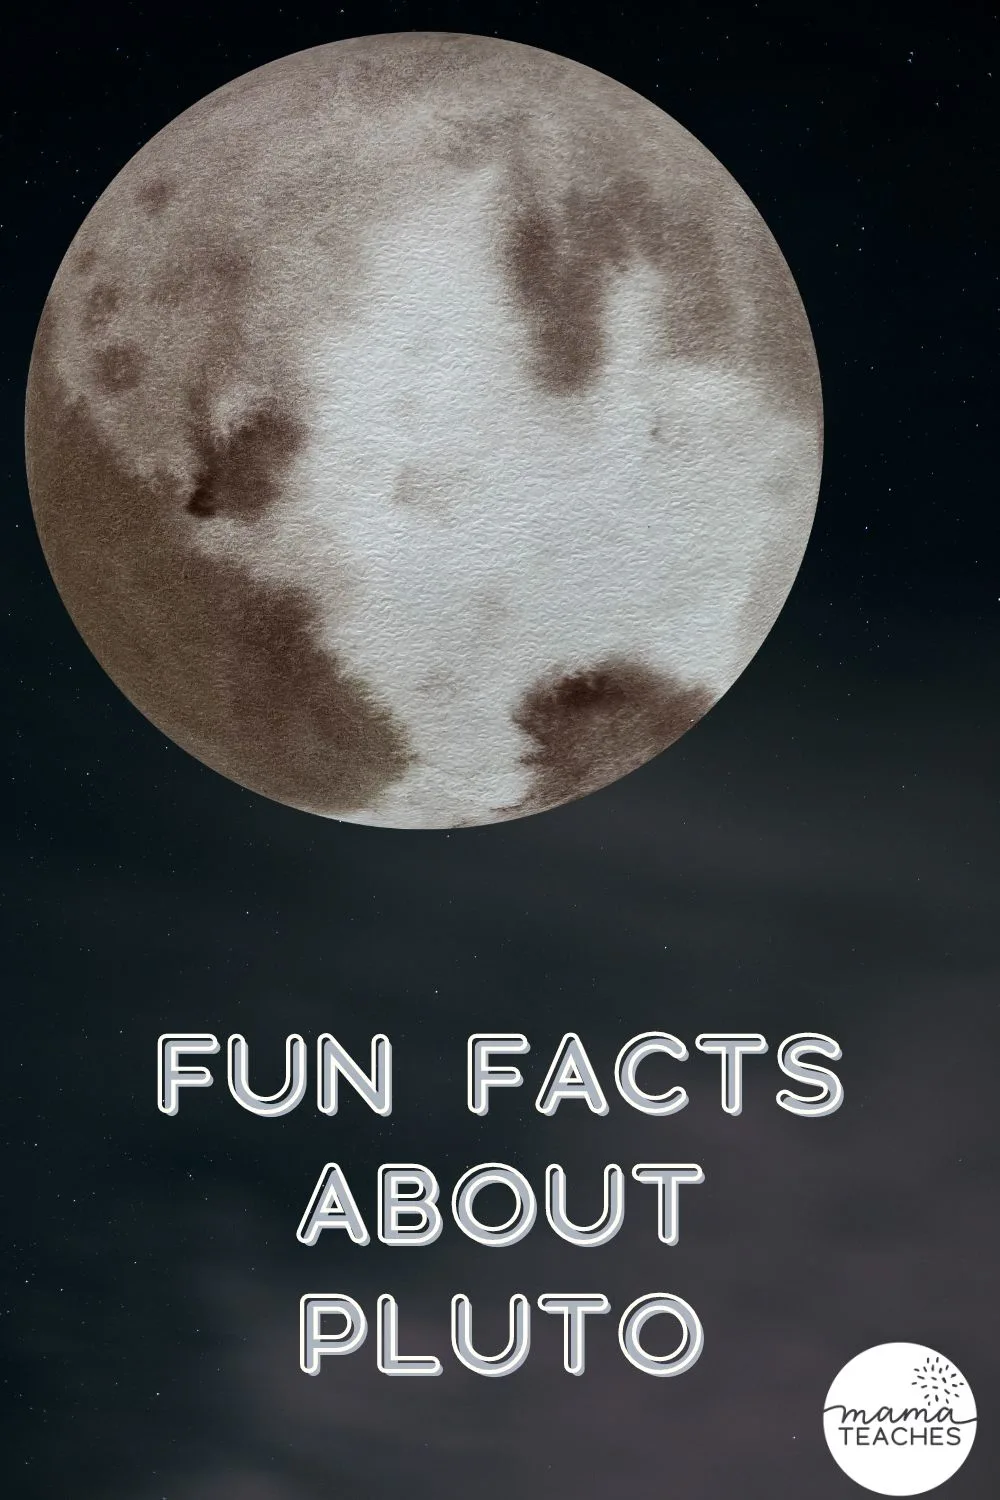 Fun Facts About Pluto